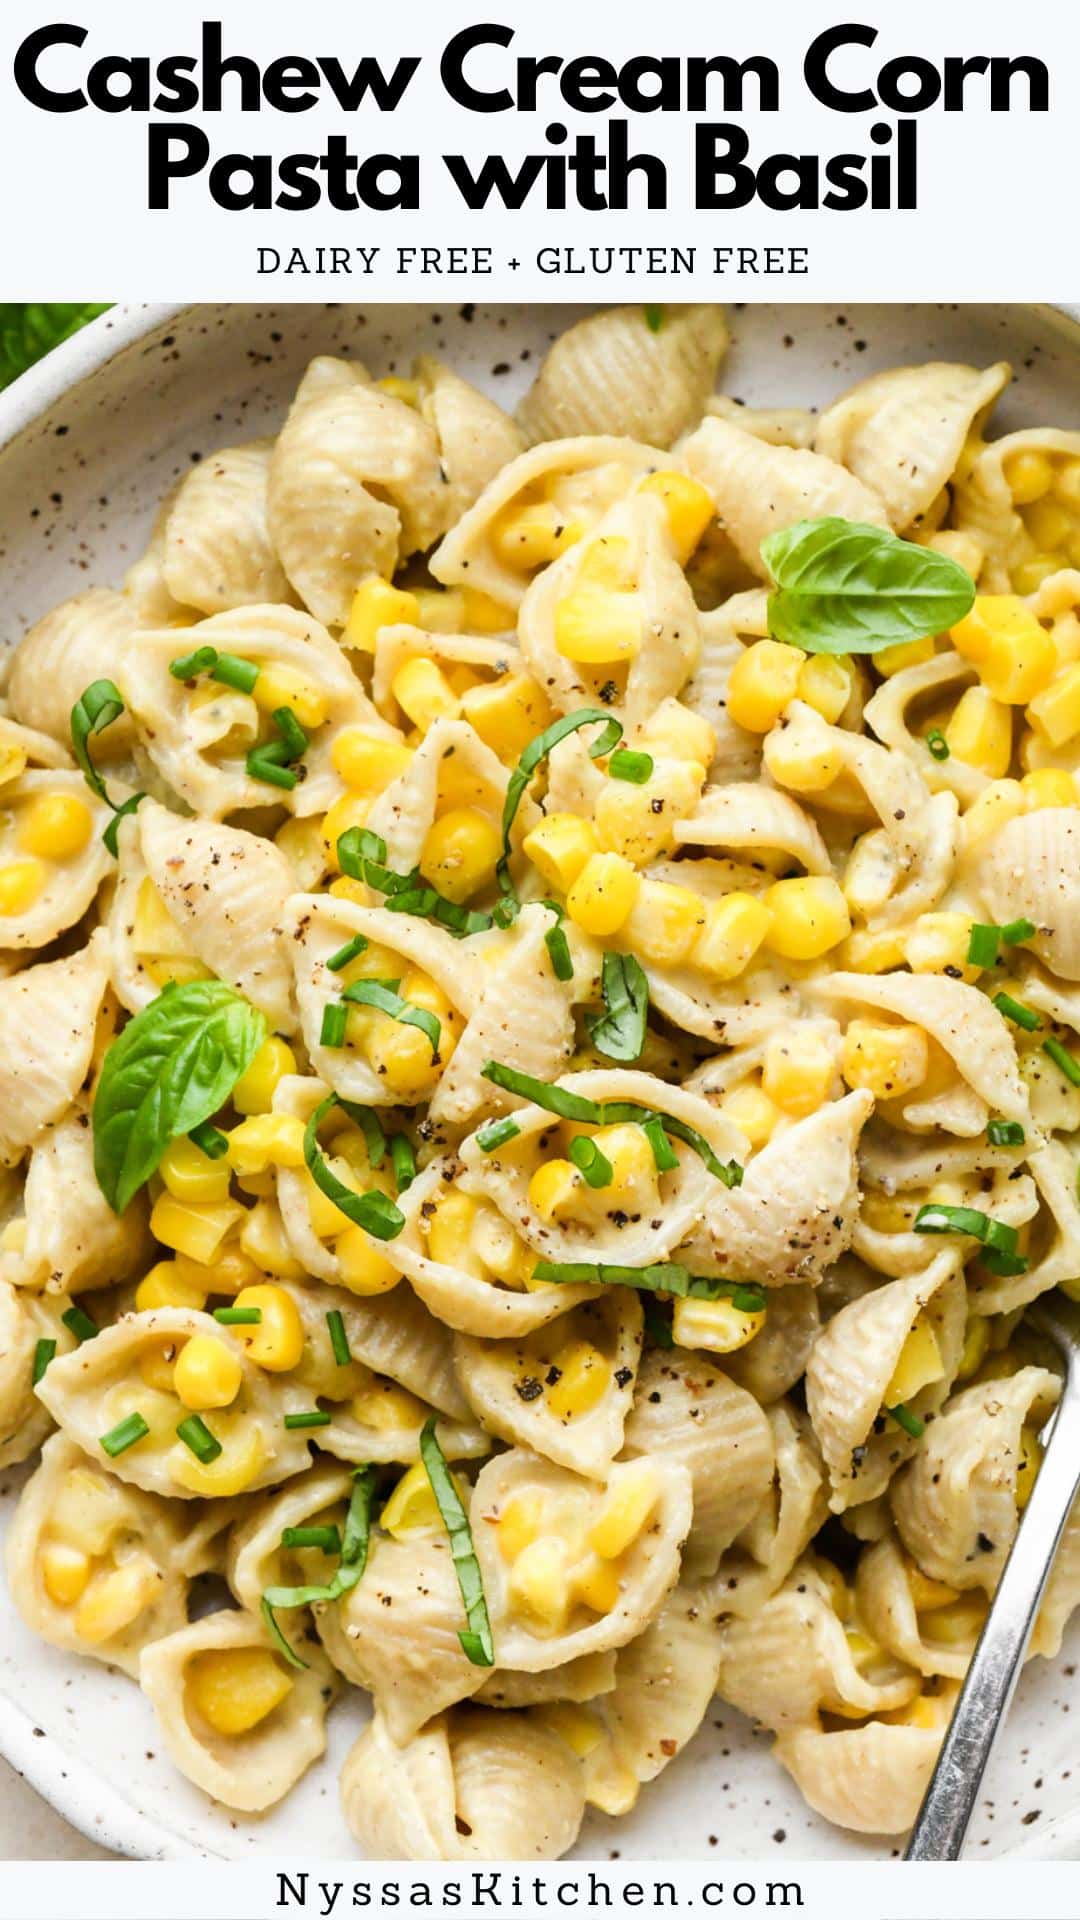 This super simple cashew cream corn pasta with basil makes the best quick summer meal! Made with an exceptionally creamy (easy to make!) cashew-based sauce, fresh or frozen sweet corn, your favorite pasta, and basil. It will delight the entire table for lunch, dinner, or as a flavorful side dish. It is GF, dairy free, vegan, and vegetarian.